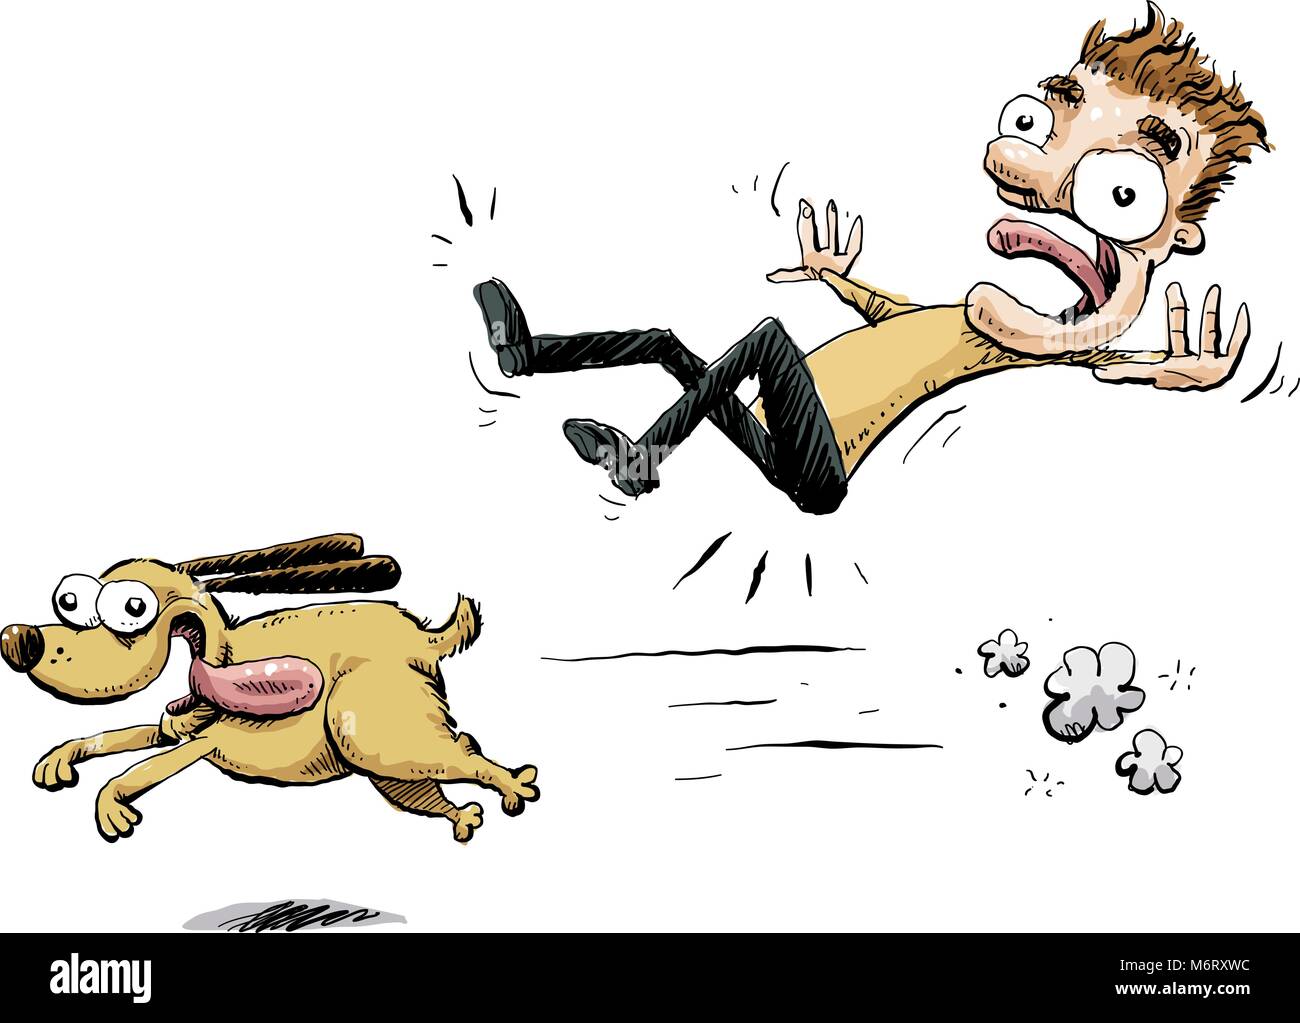 A happy, cartoon dog dashes forward, knocking over a standing man. Stock Vector